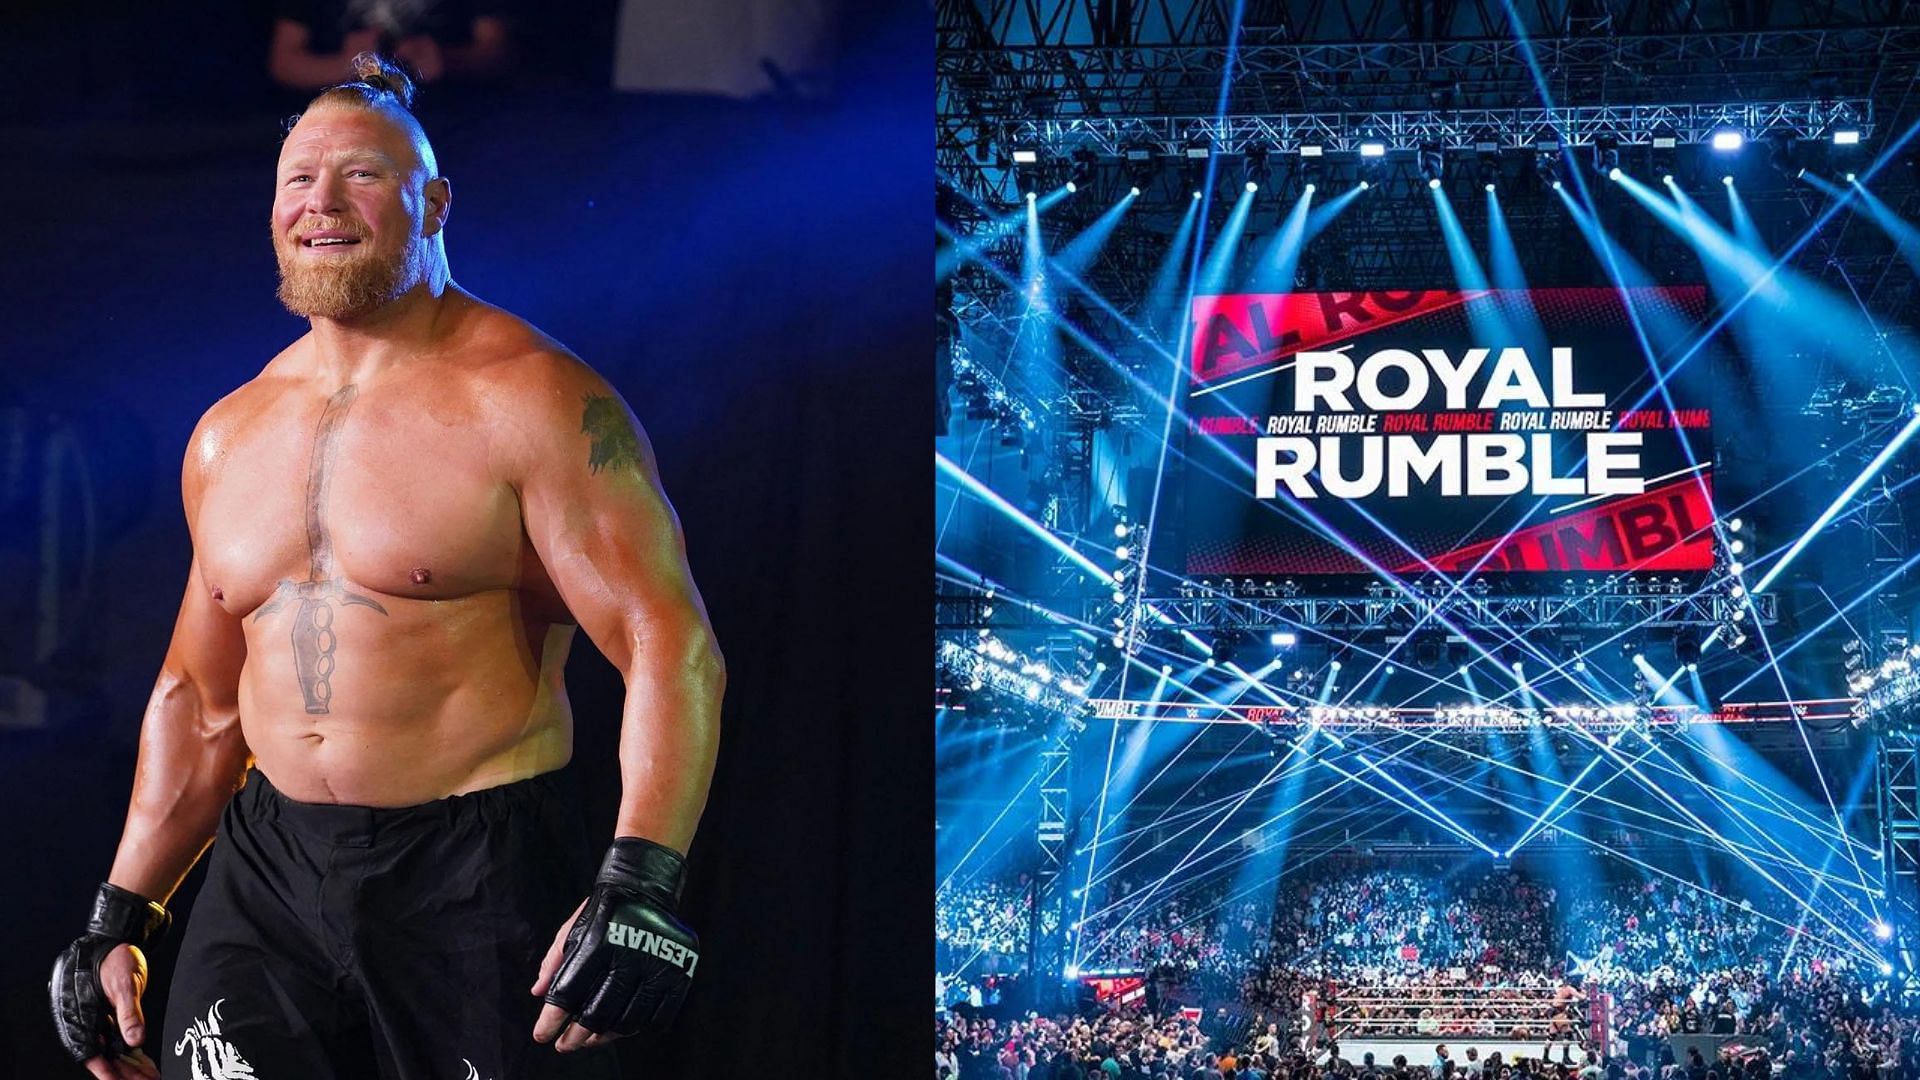 Brock Lesnar was allegedly not the first choice to win WWE Royal Rumble 2022